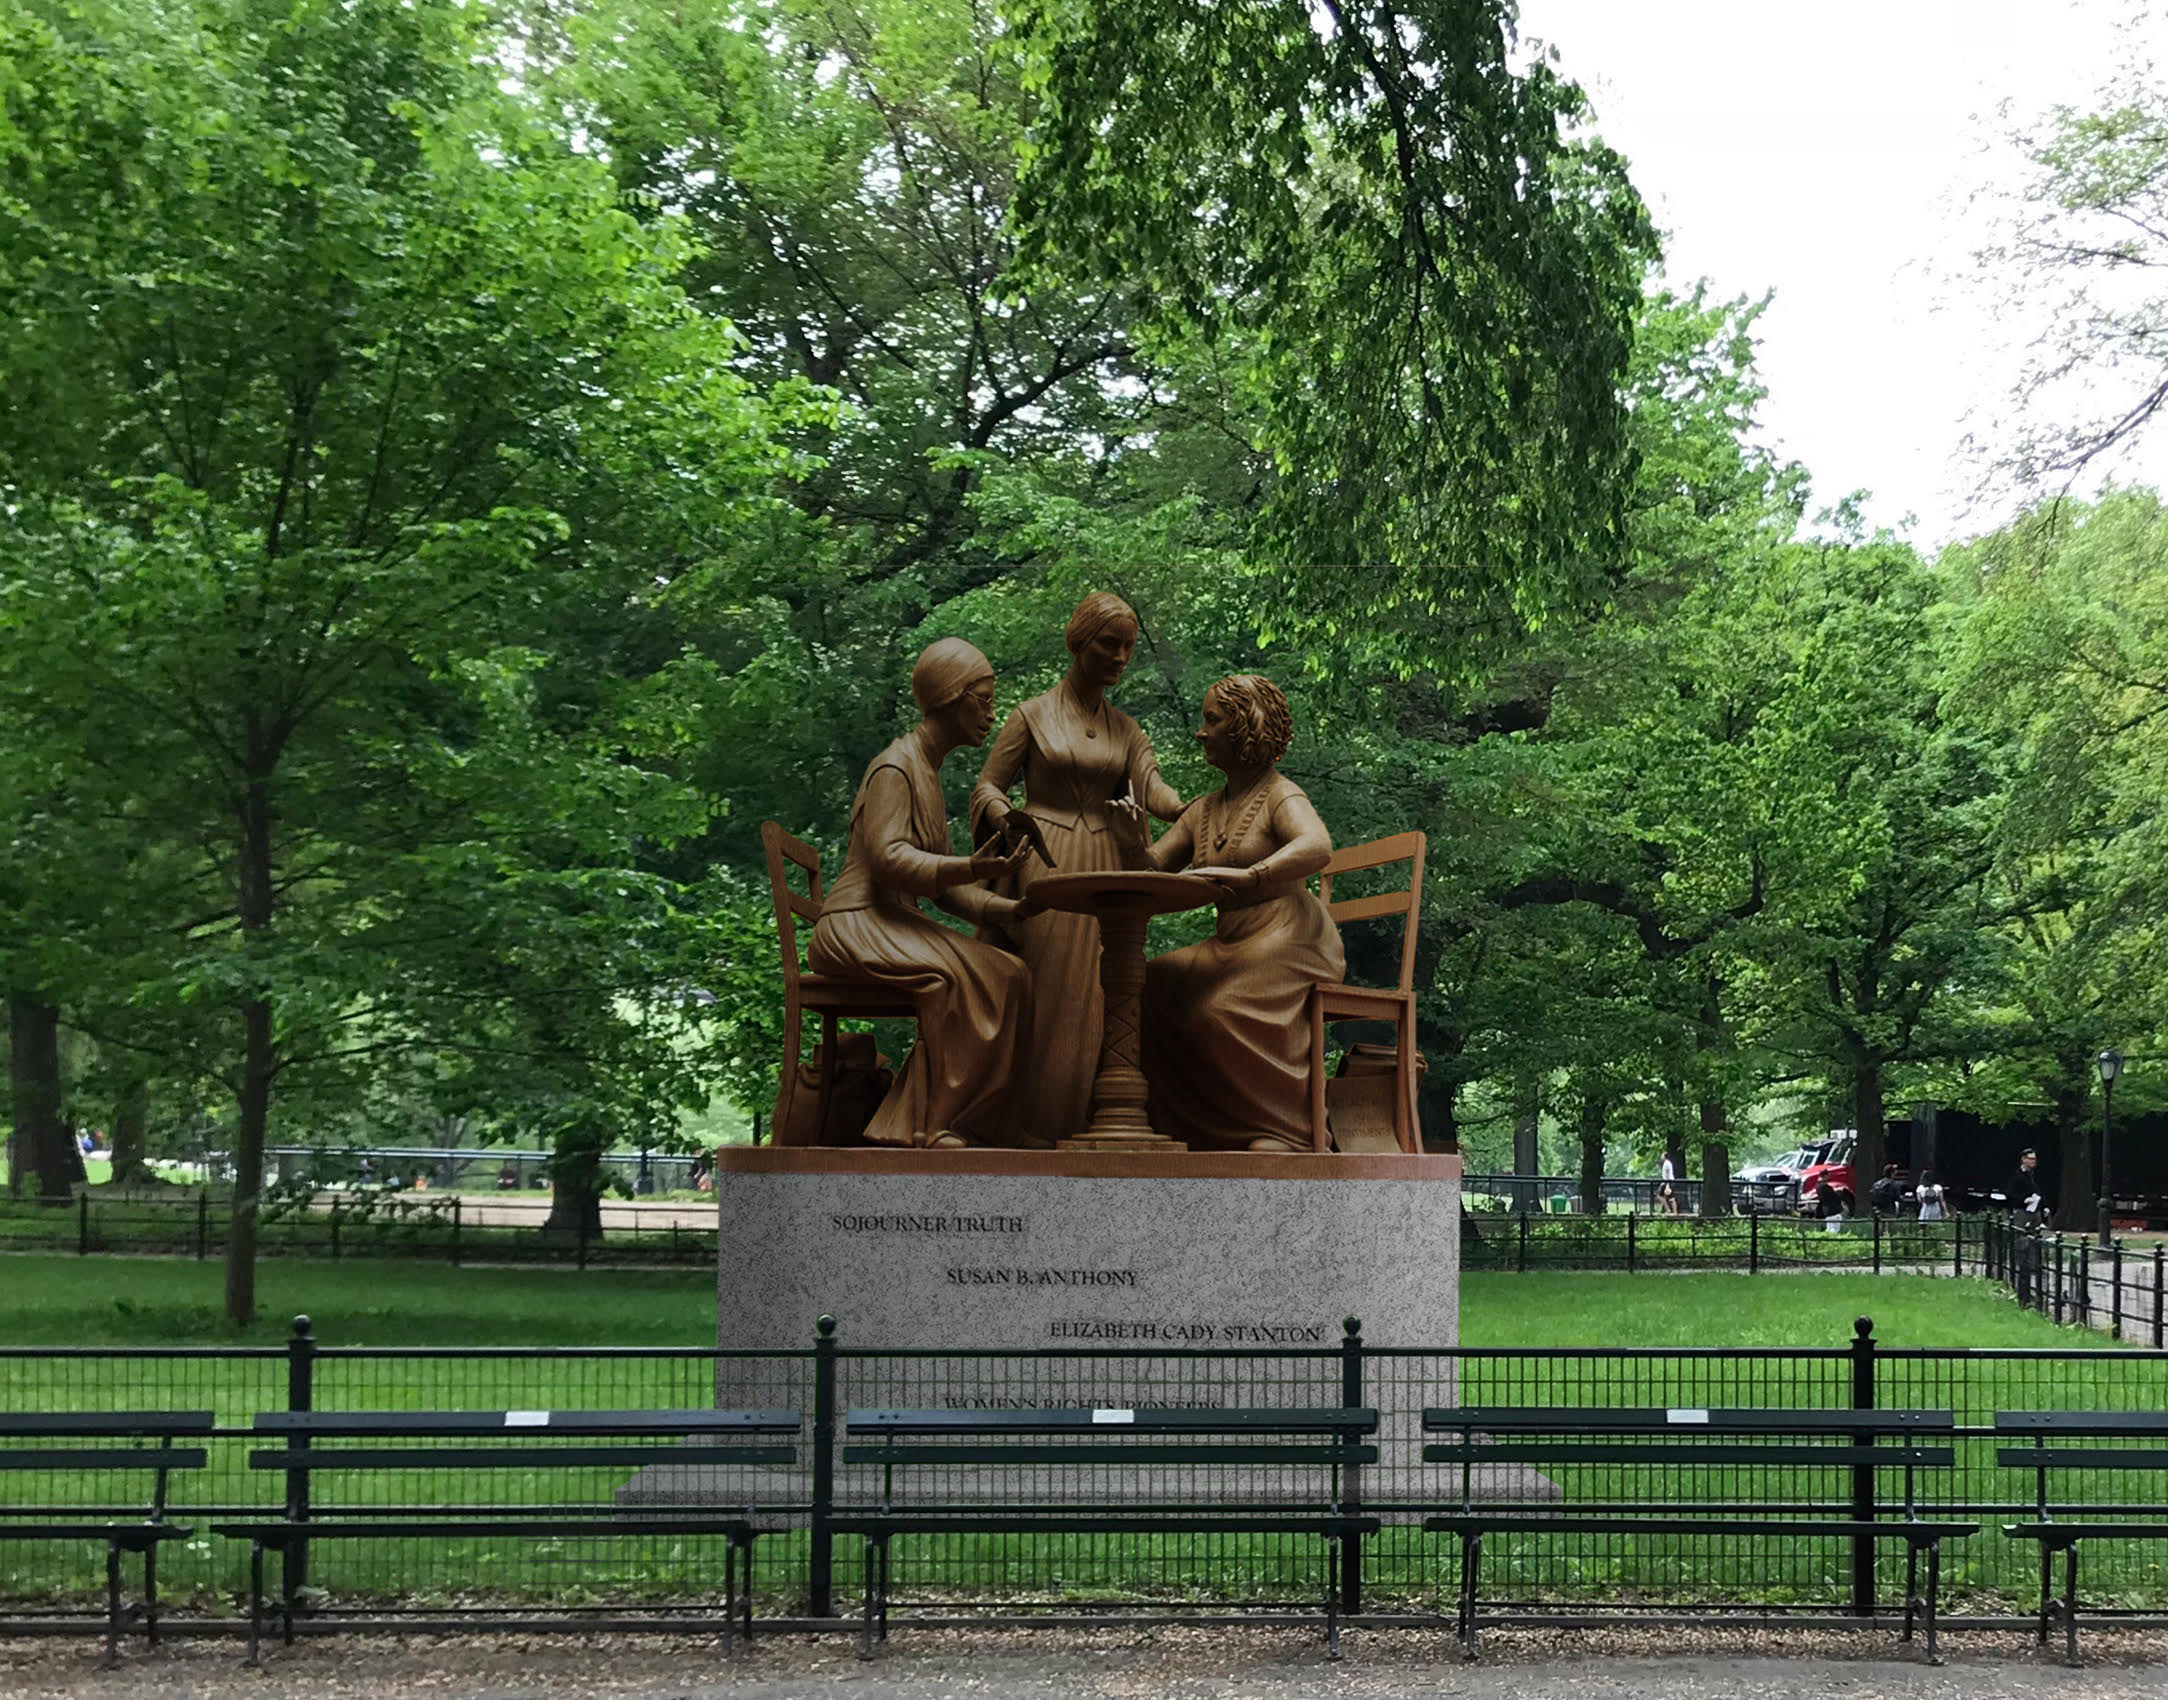 A rendering of the approved design for the Women's Statue in Central Park, by Meredith Bergmann